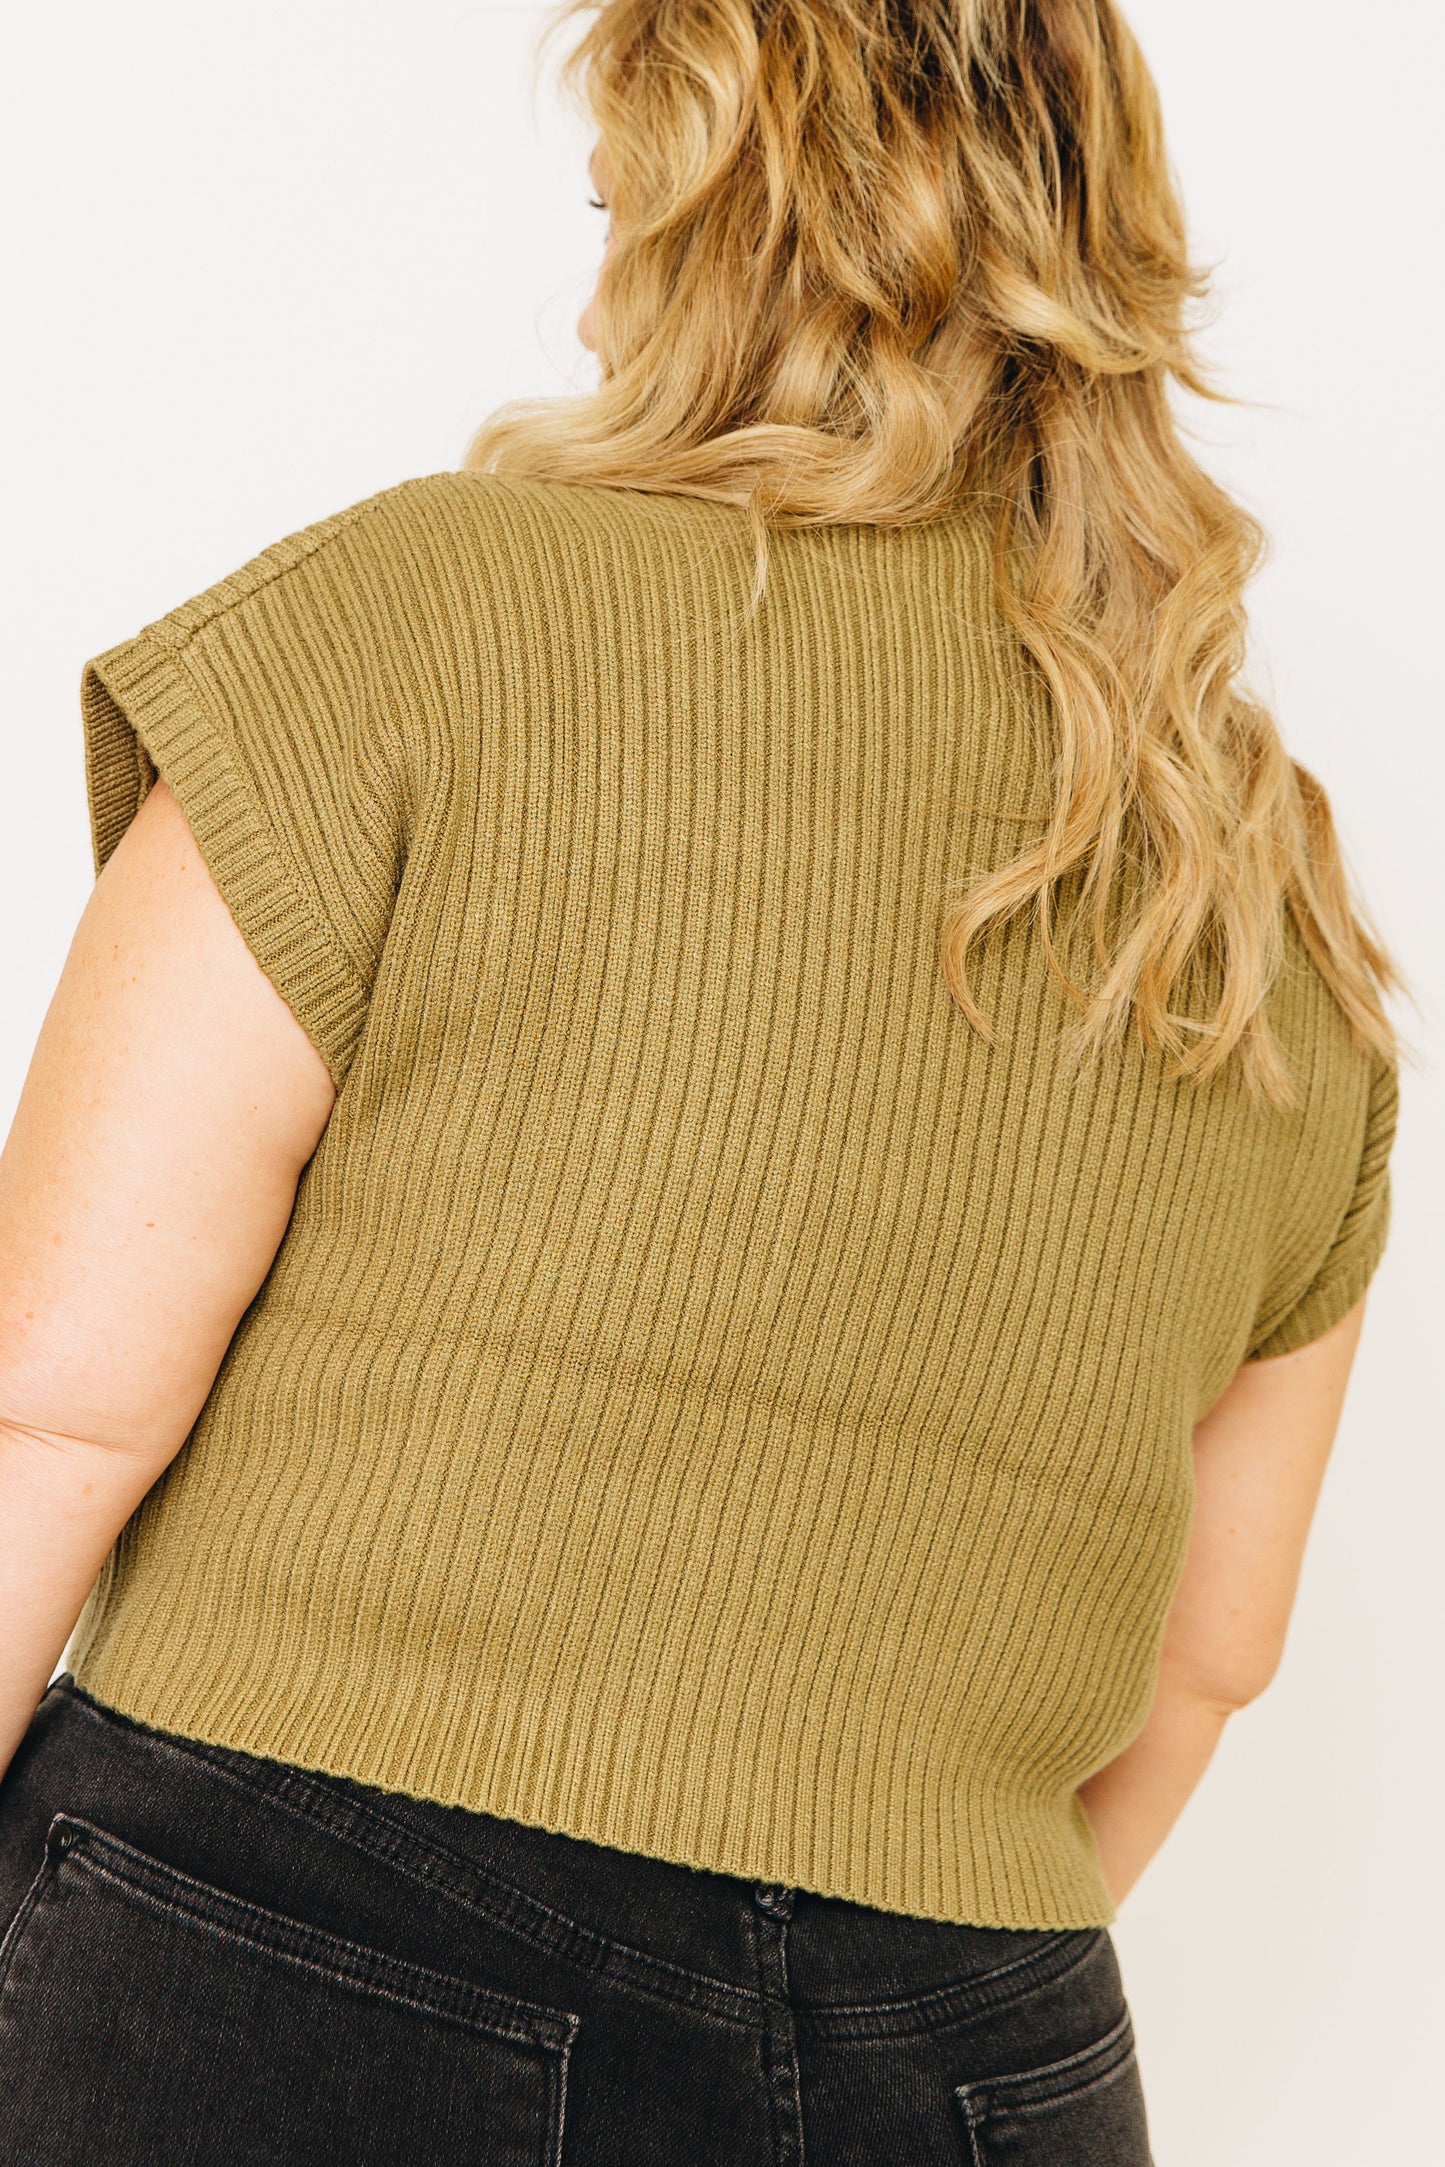 Luxe Knit Mock Neck Sweater Top (S-2XL)